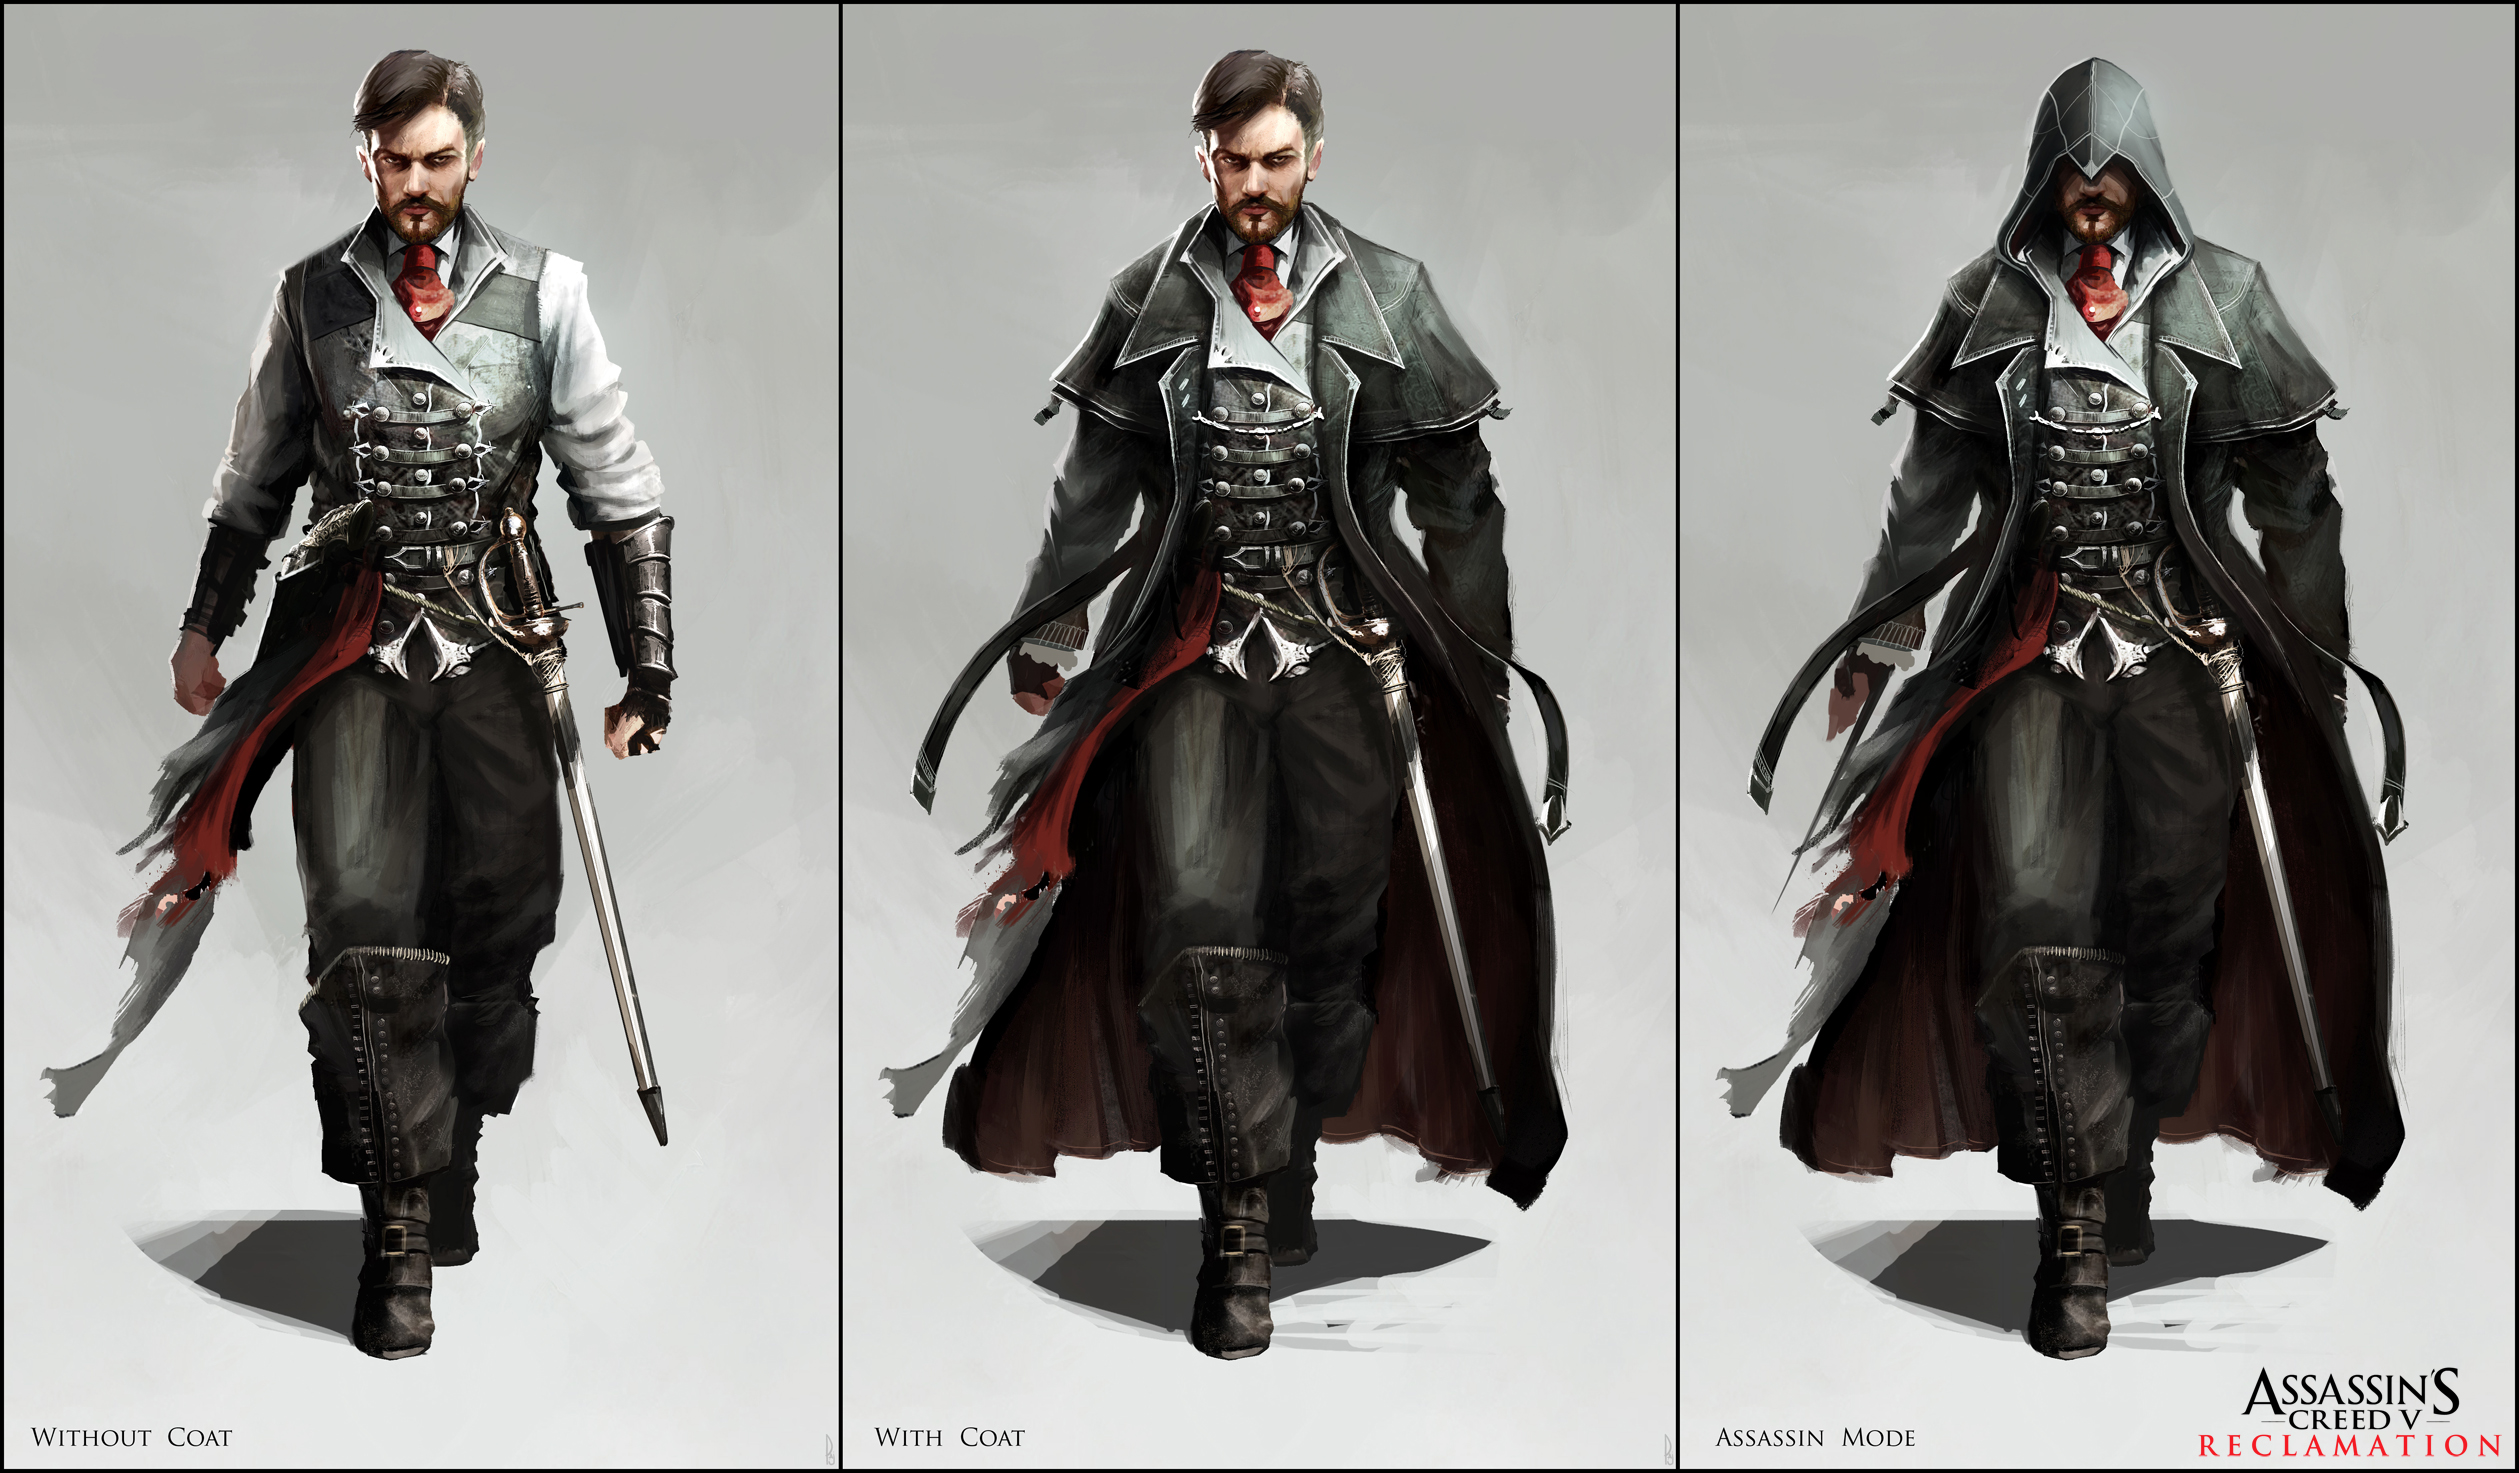 Assassin's Creed V: Character Designs